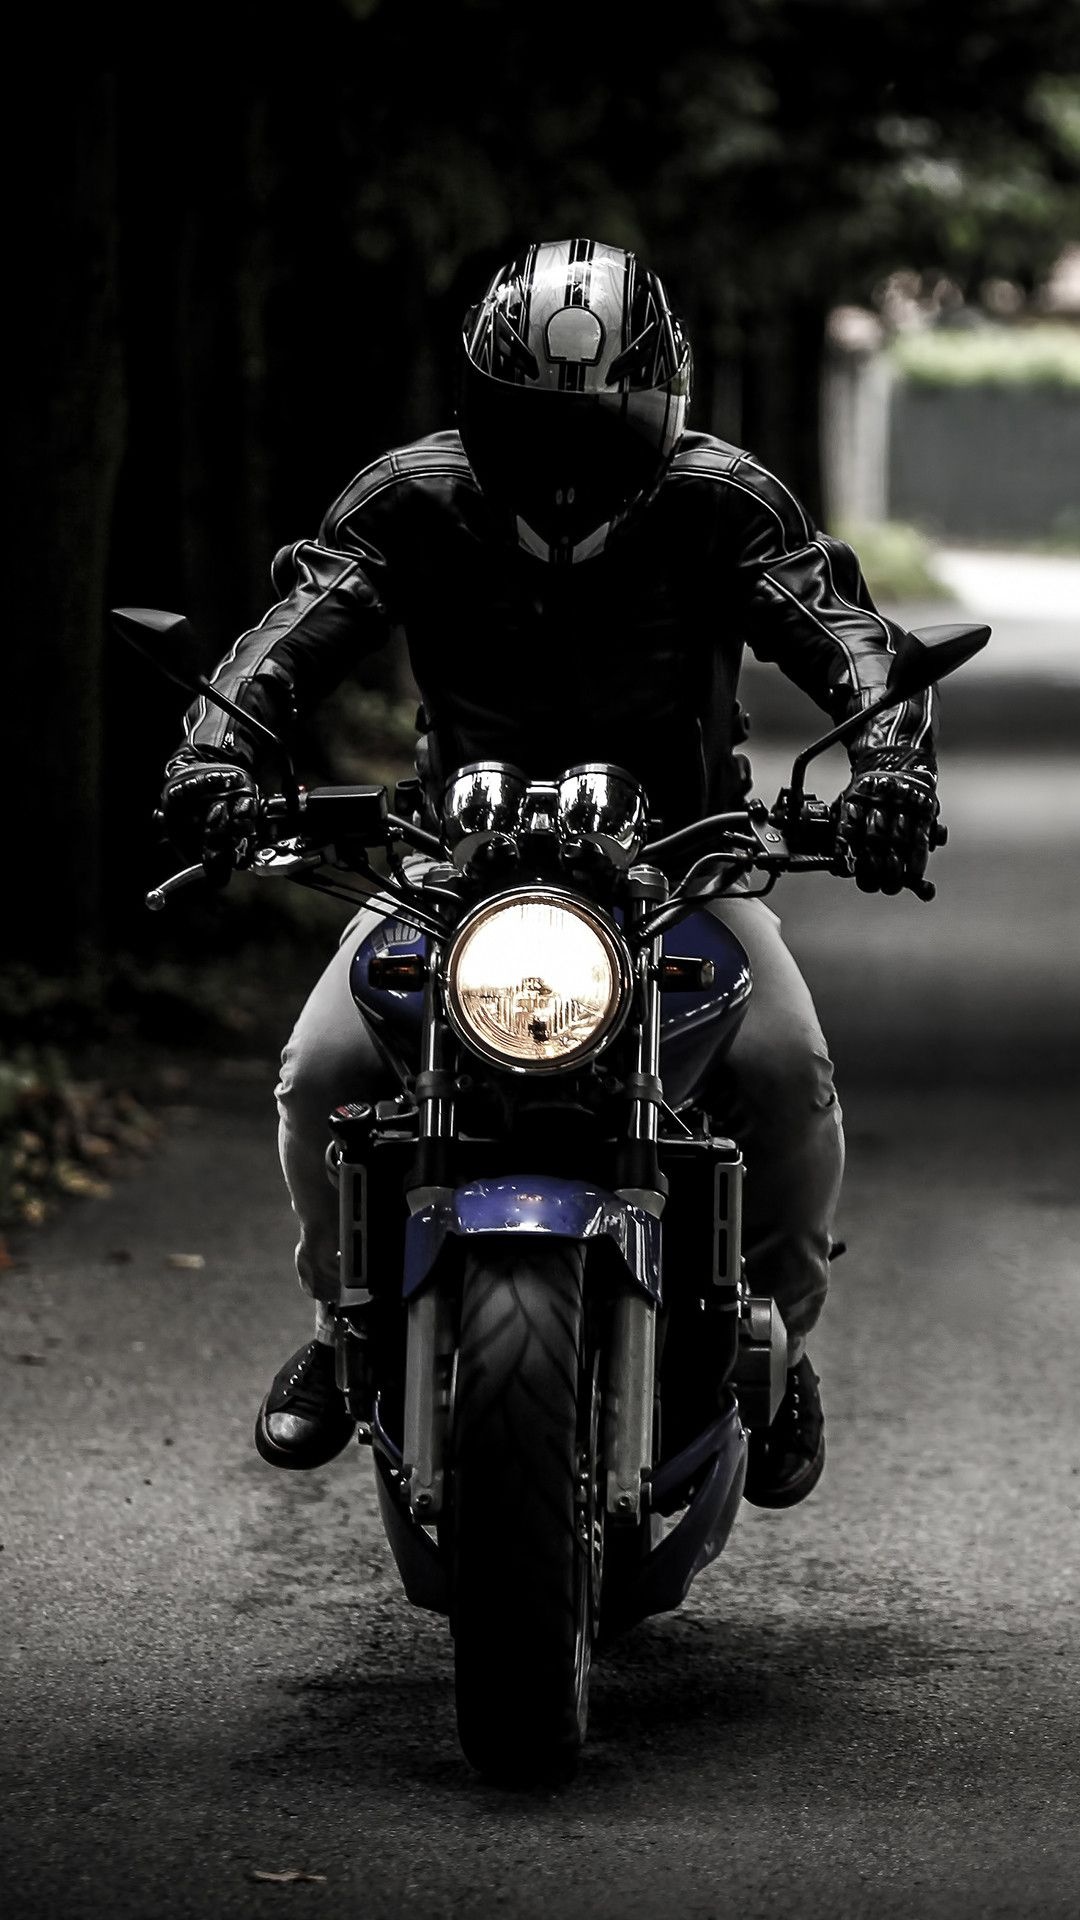 Street Bike, Motorcycle wallpapers, Rider's paradise, On the open road, 1080x1920 Full HD Handy